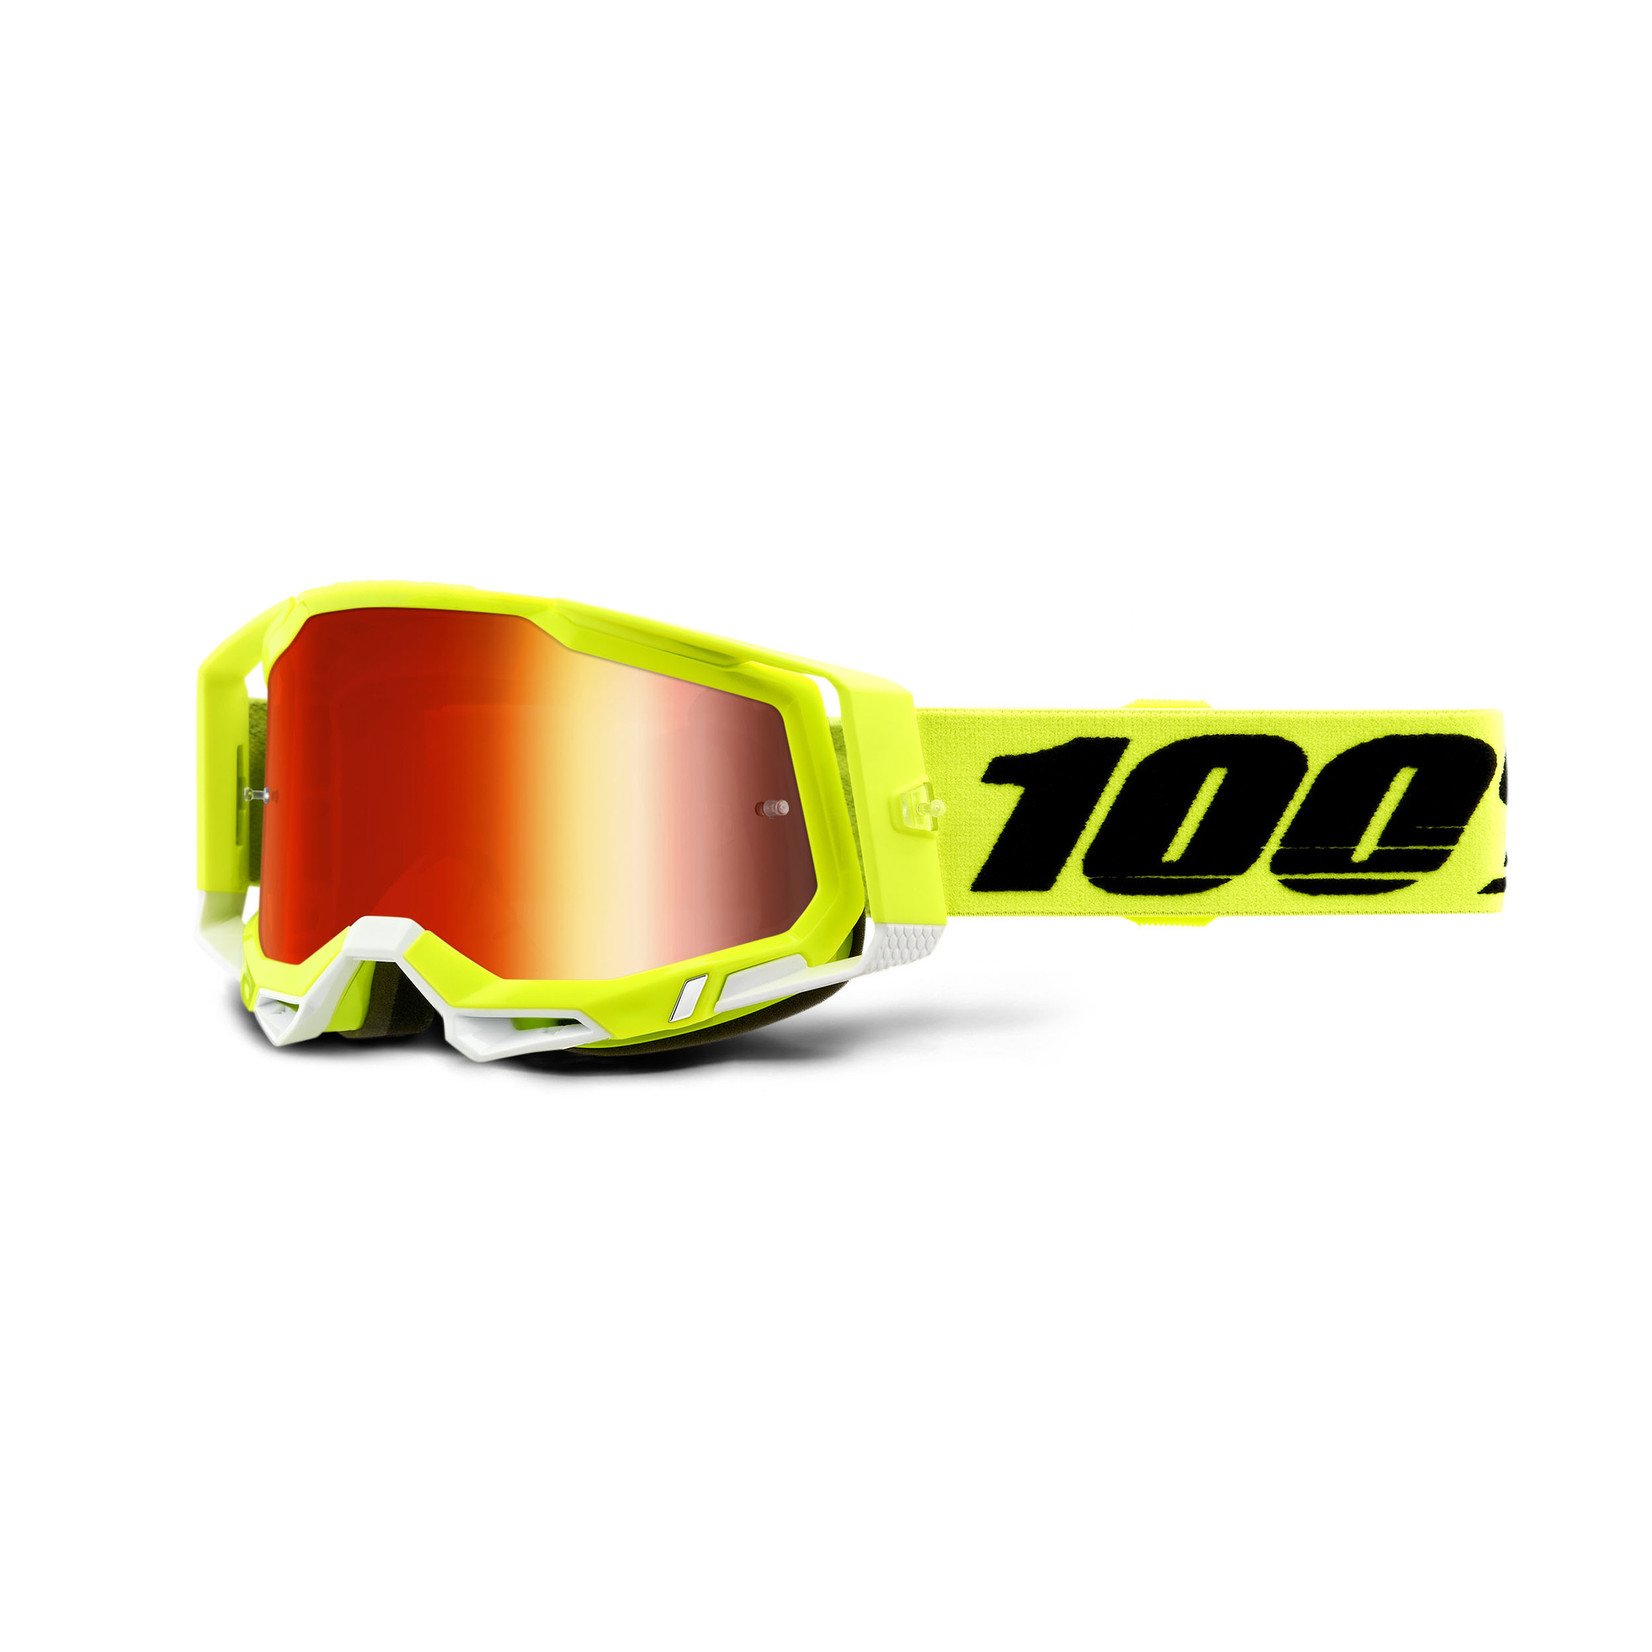 1 100% Racecraft 2 Goggle Yellow - Mirror Red